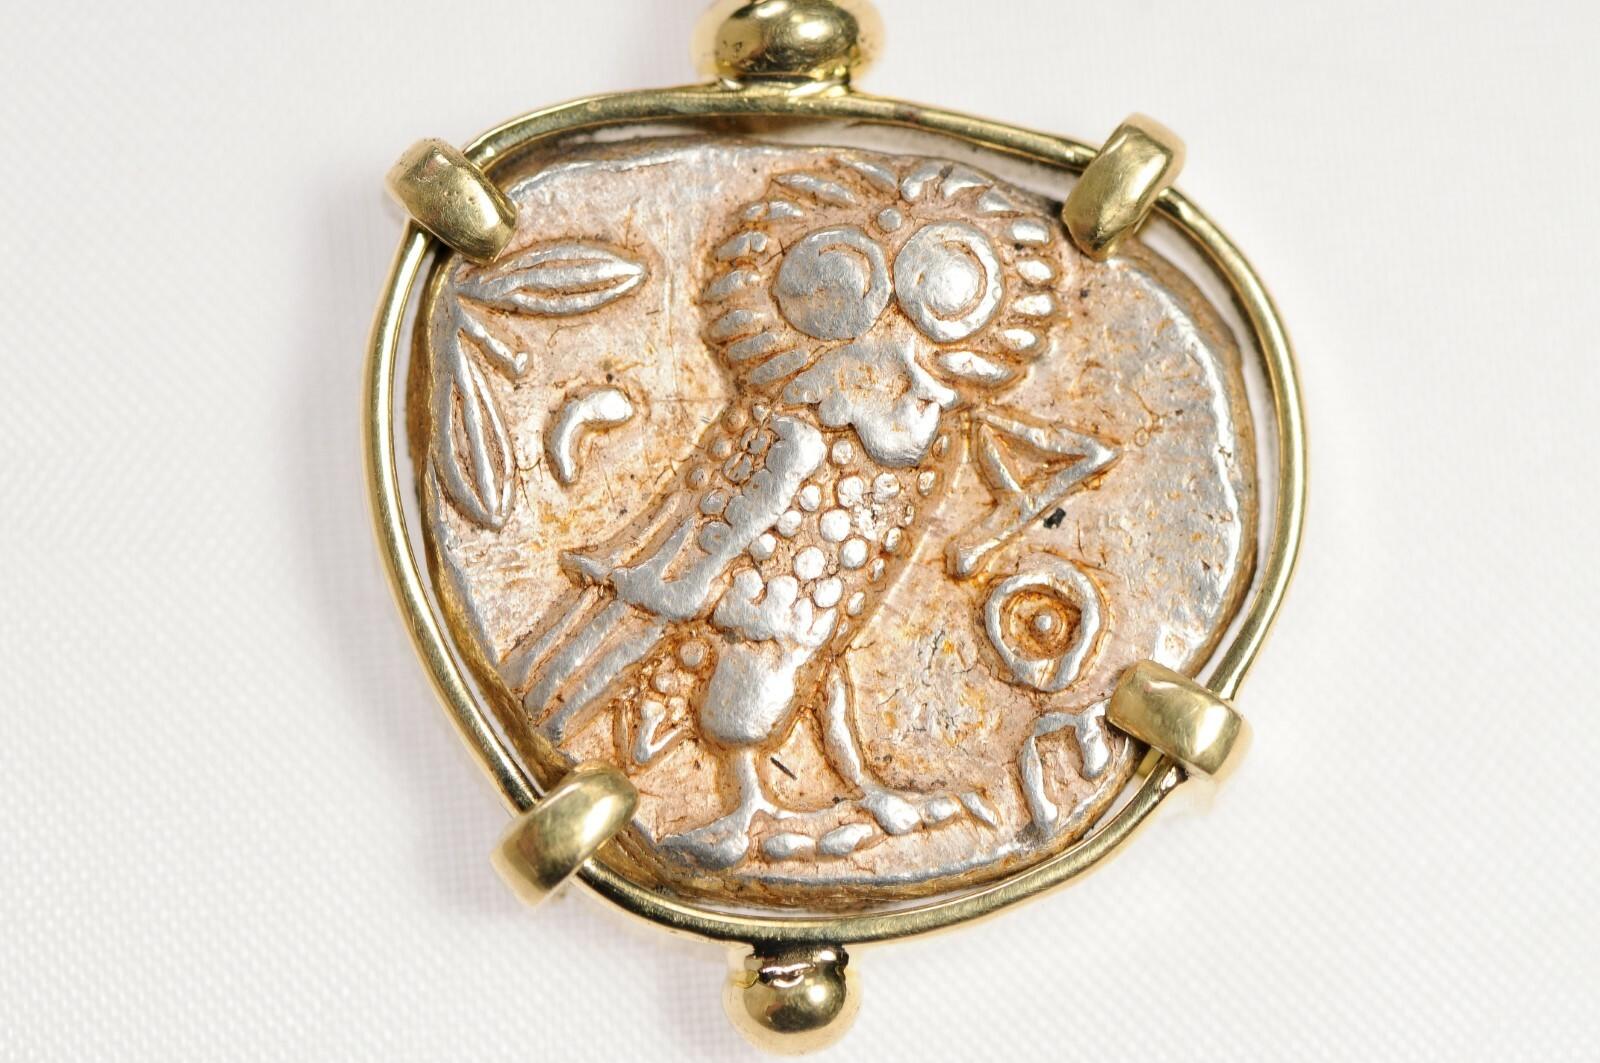 Owl & Athena Coin Pendant set in 18kt Gold In Excellent Condition For Sale In Atlanta, GA